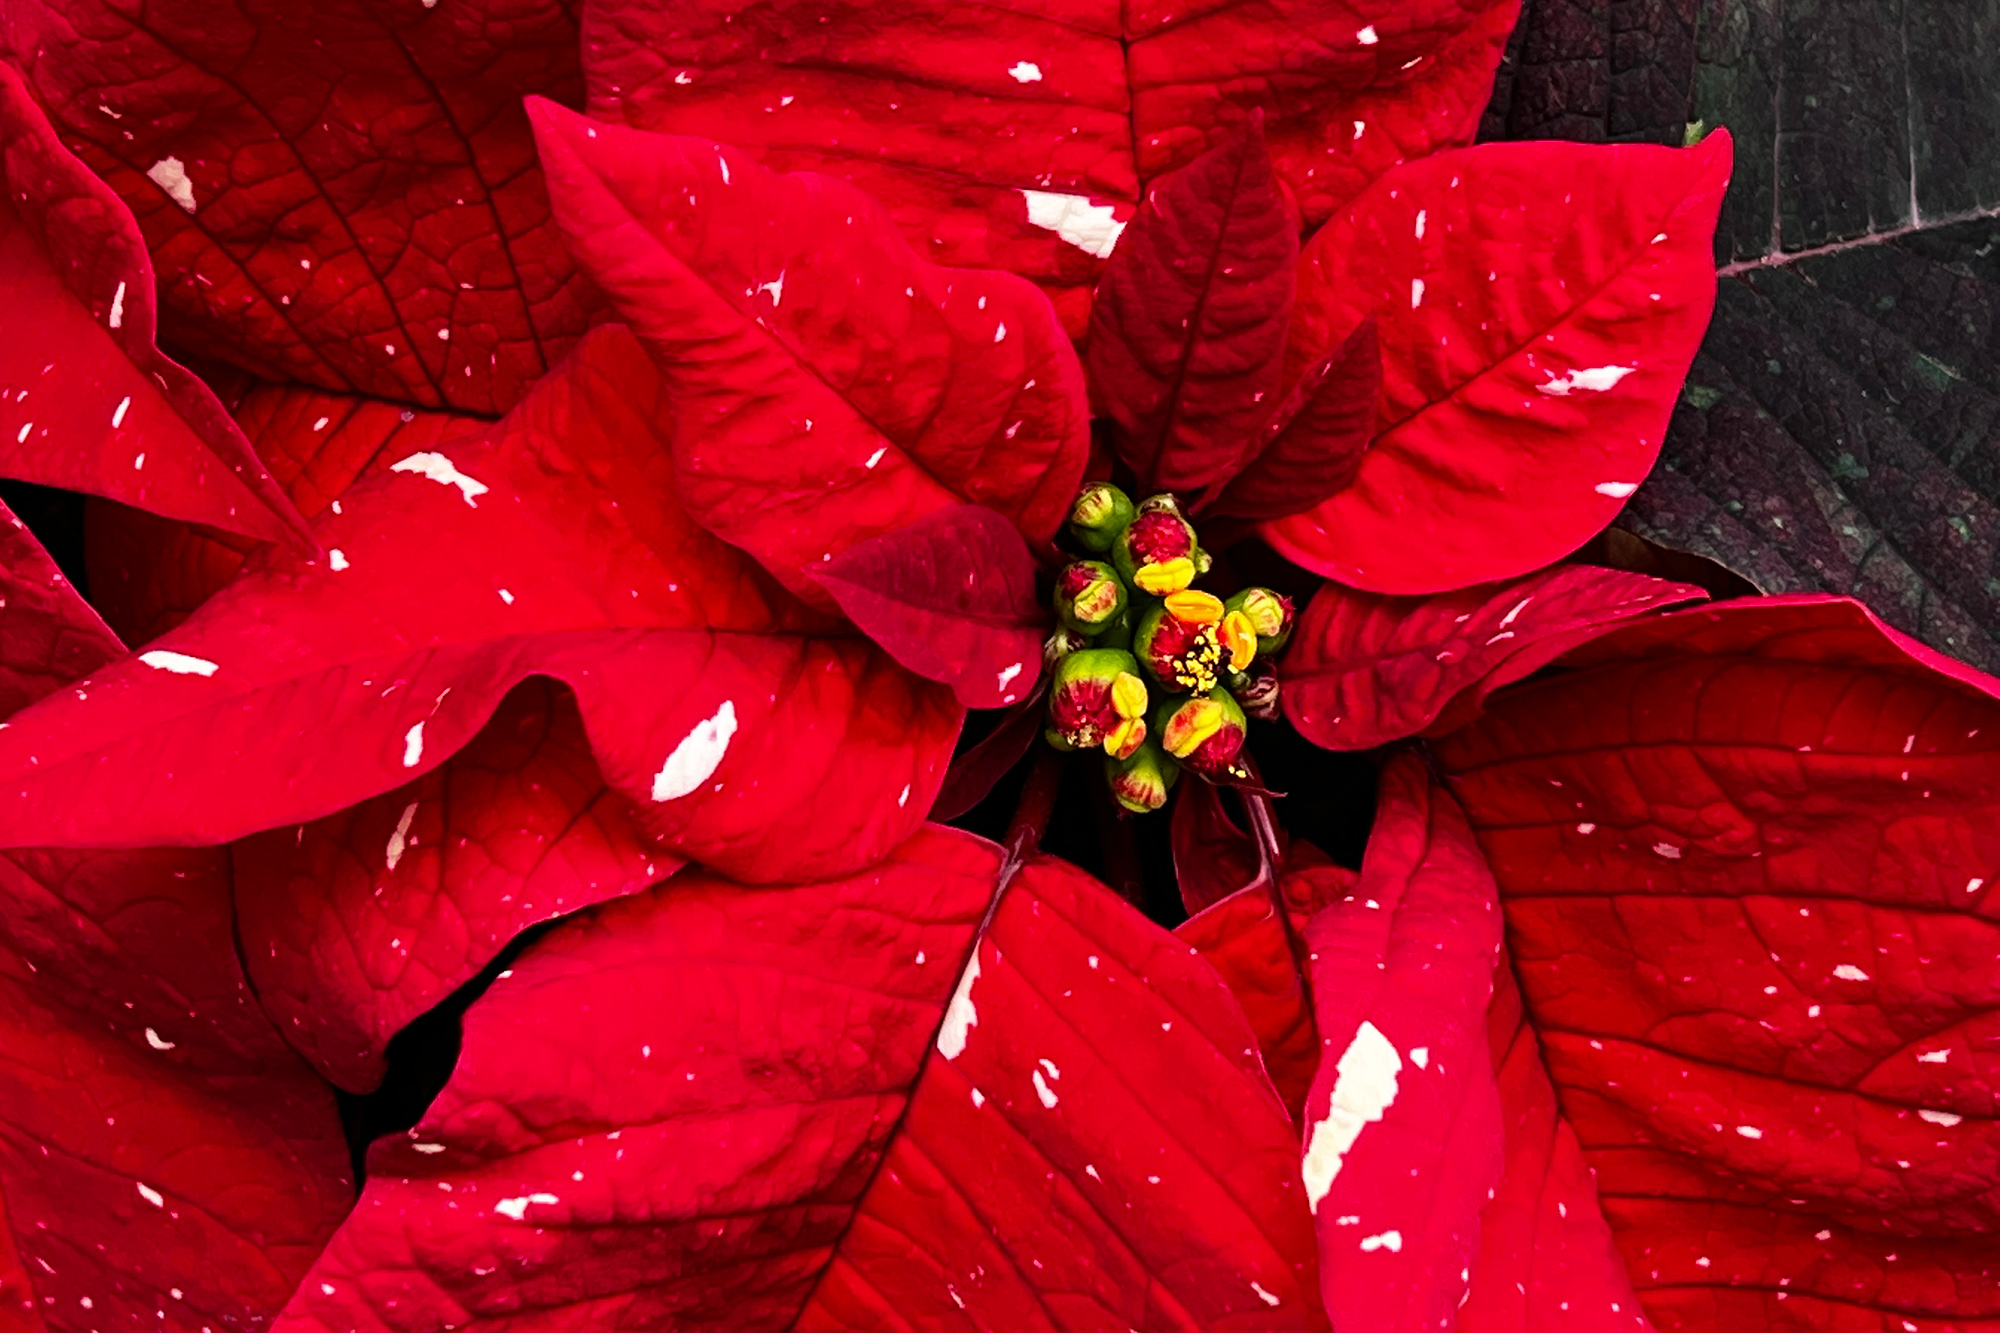 Healthy poinsettias grow in soil that’s moist to the touch. Soil that’s too dry or wet could result in a poinsettia’s shortened lifespan.